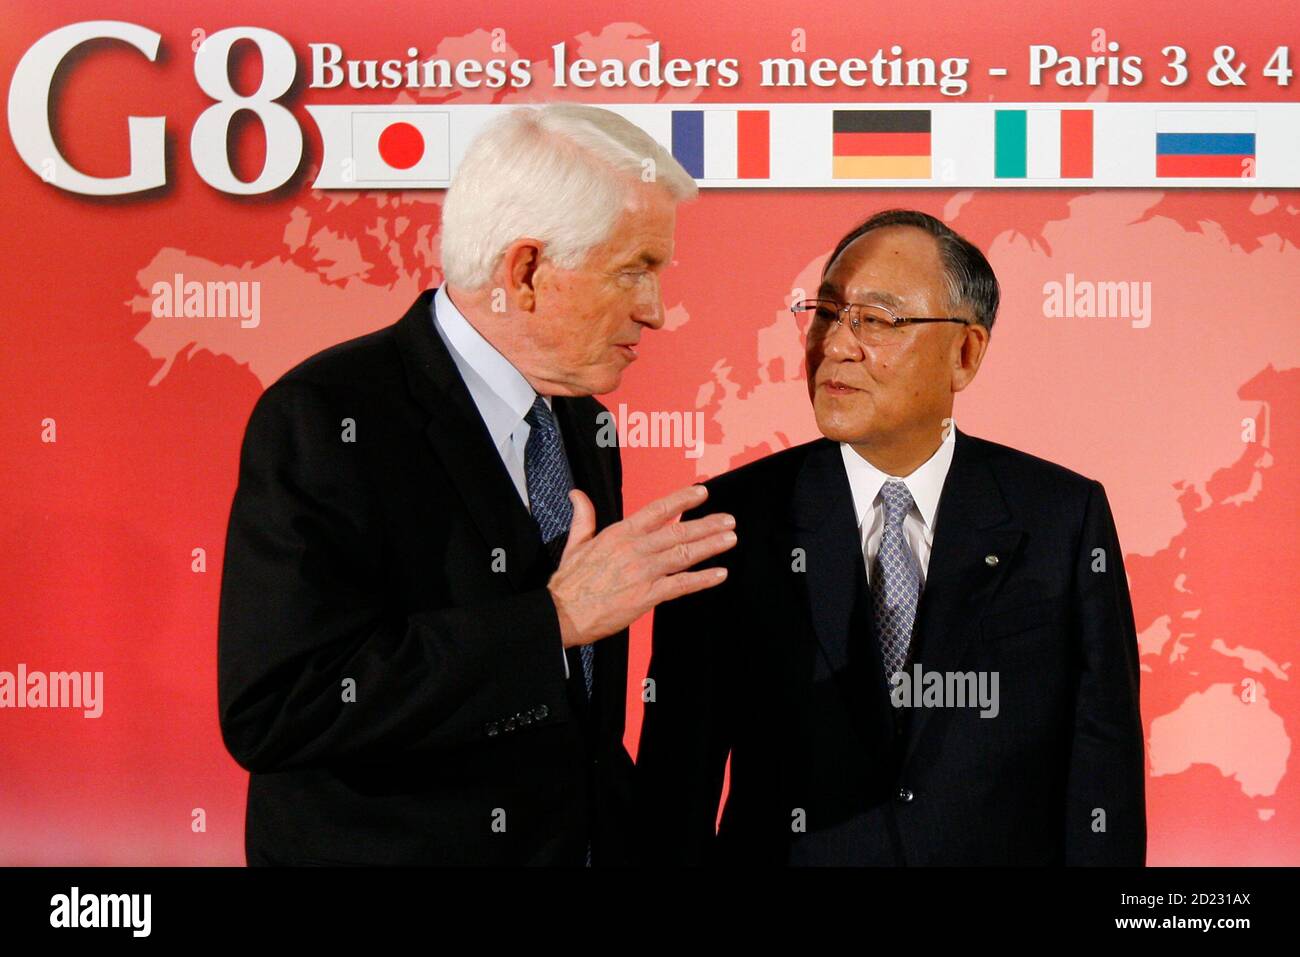 Thomas J Donohue L Of The United States Chamber Of Commerce Talks With Fujio Mitarai Of The Japan Business Federation Nippon Keidanren Before The G8 Business Leaders Meeting In Paris December 3